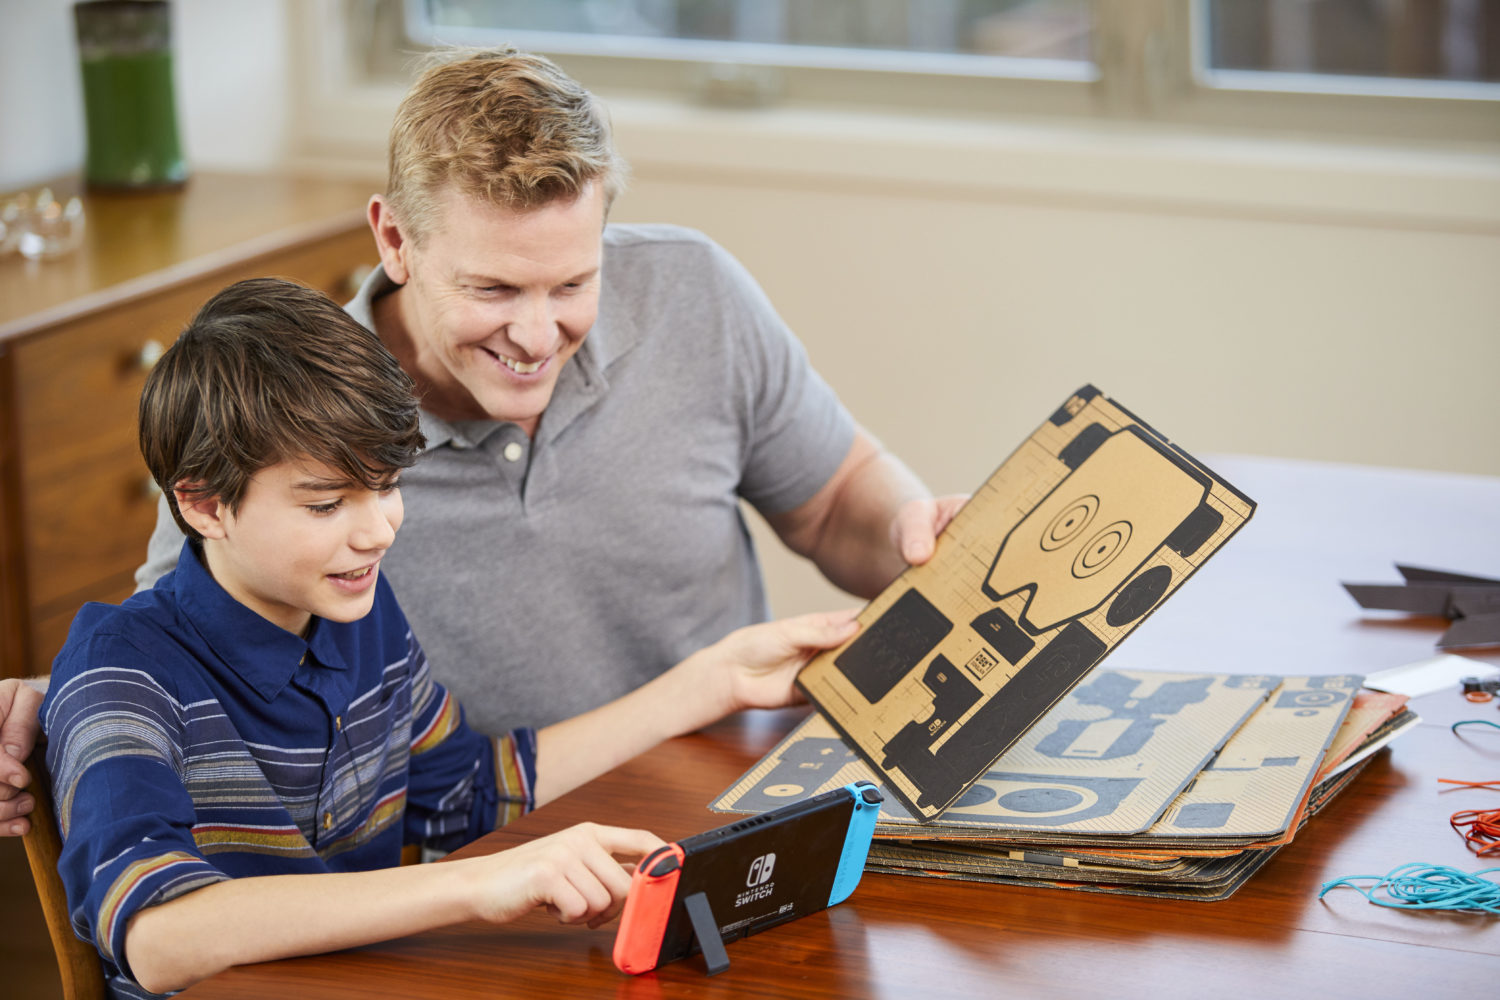 Things You Need To Know About Nintendo Labo – NintendoSoup